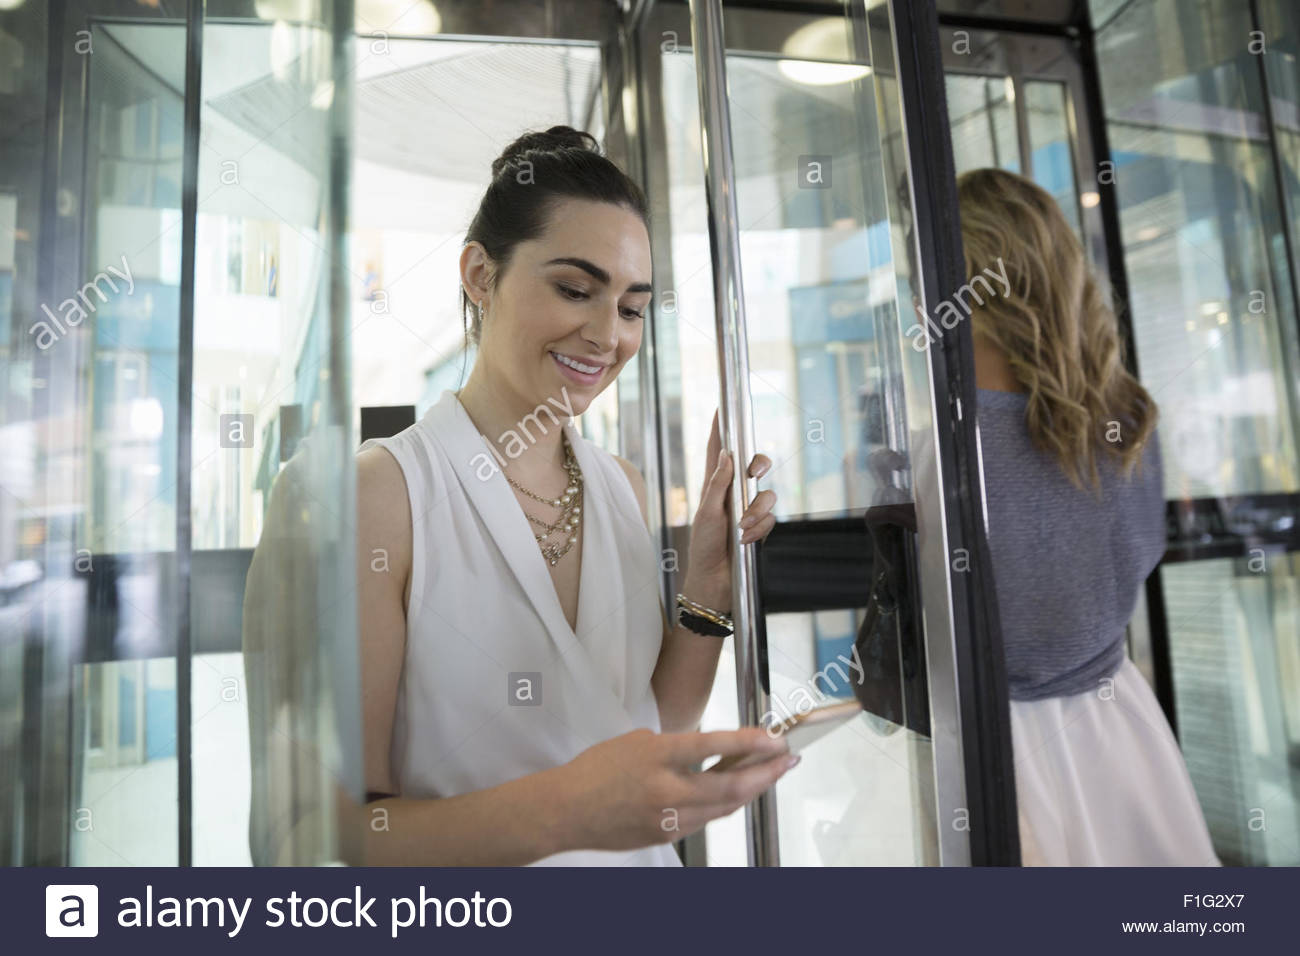 Businesswoman texting with cell phone in revolving door Stock Photo